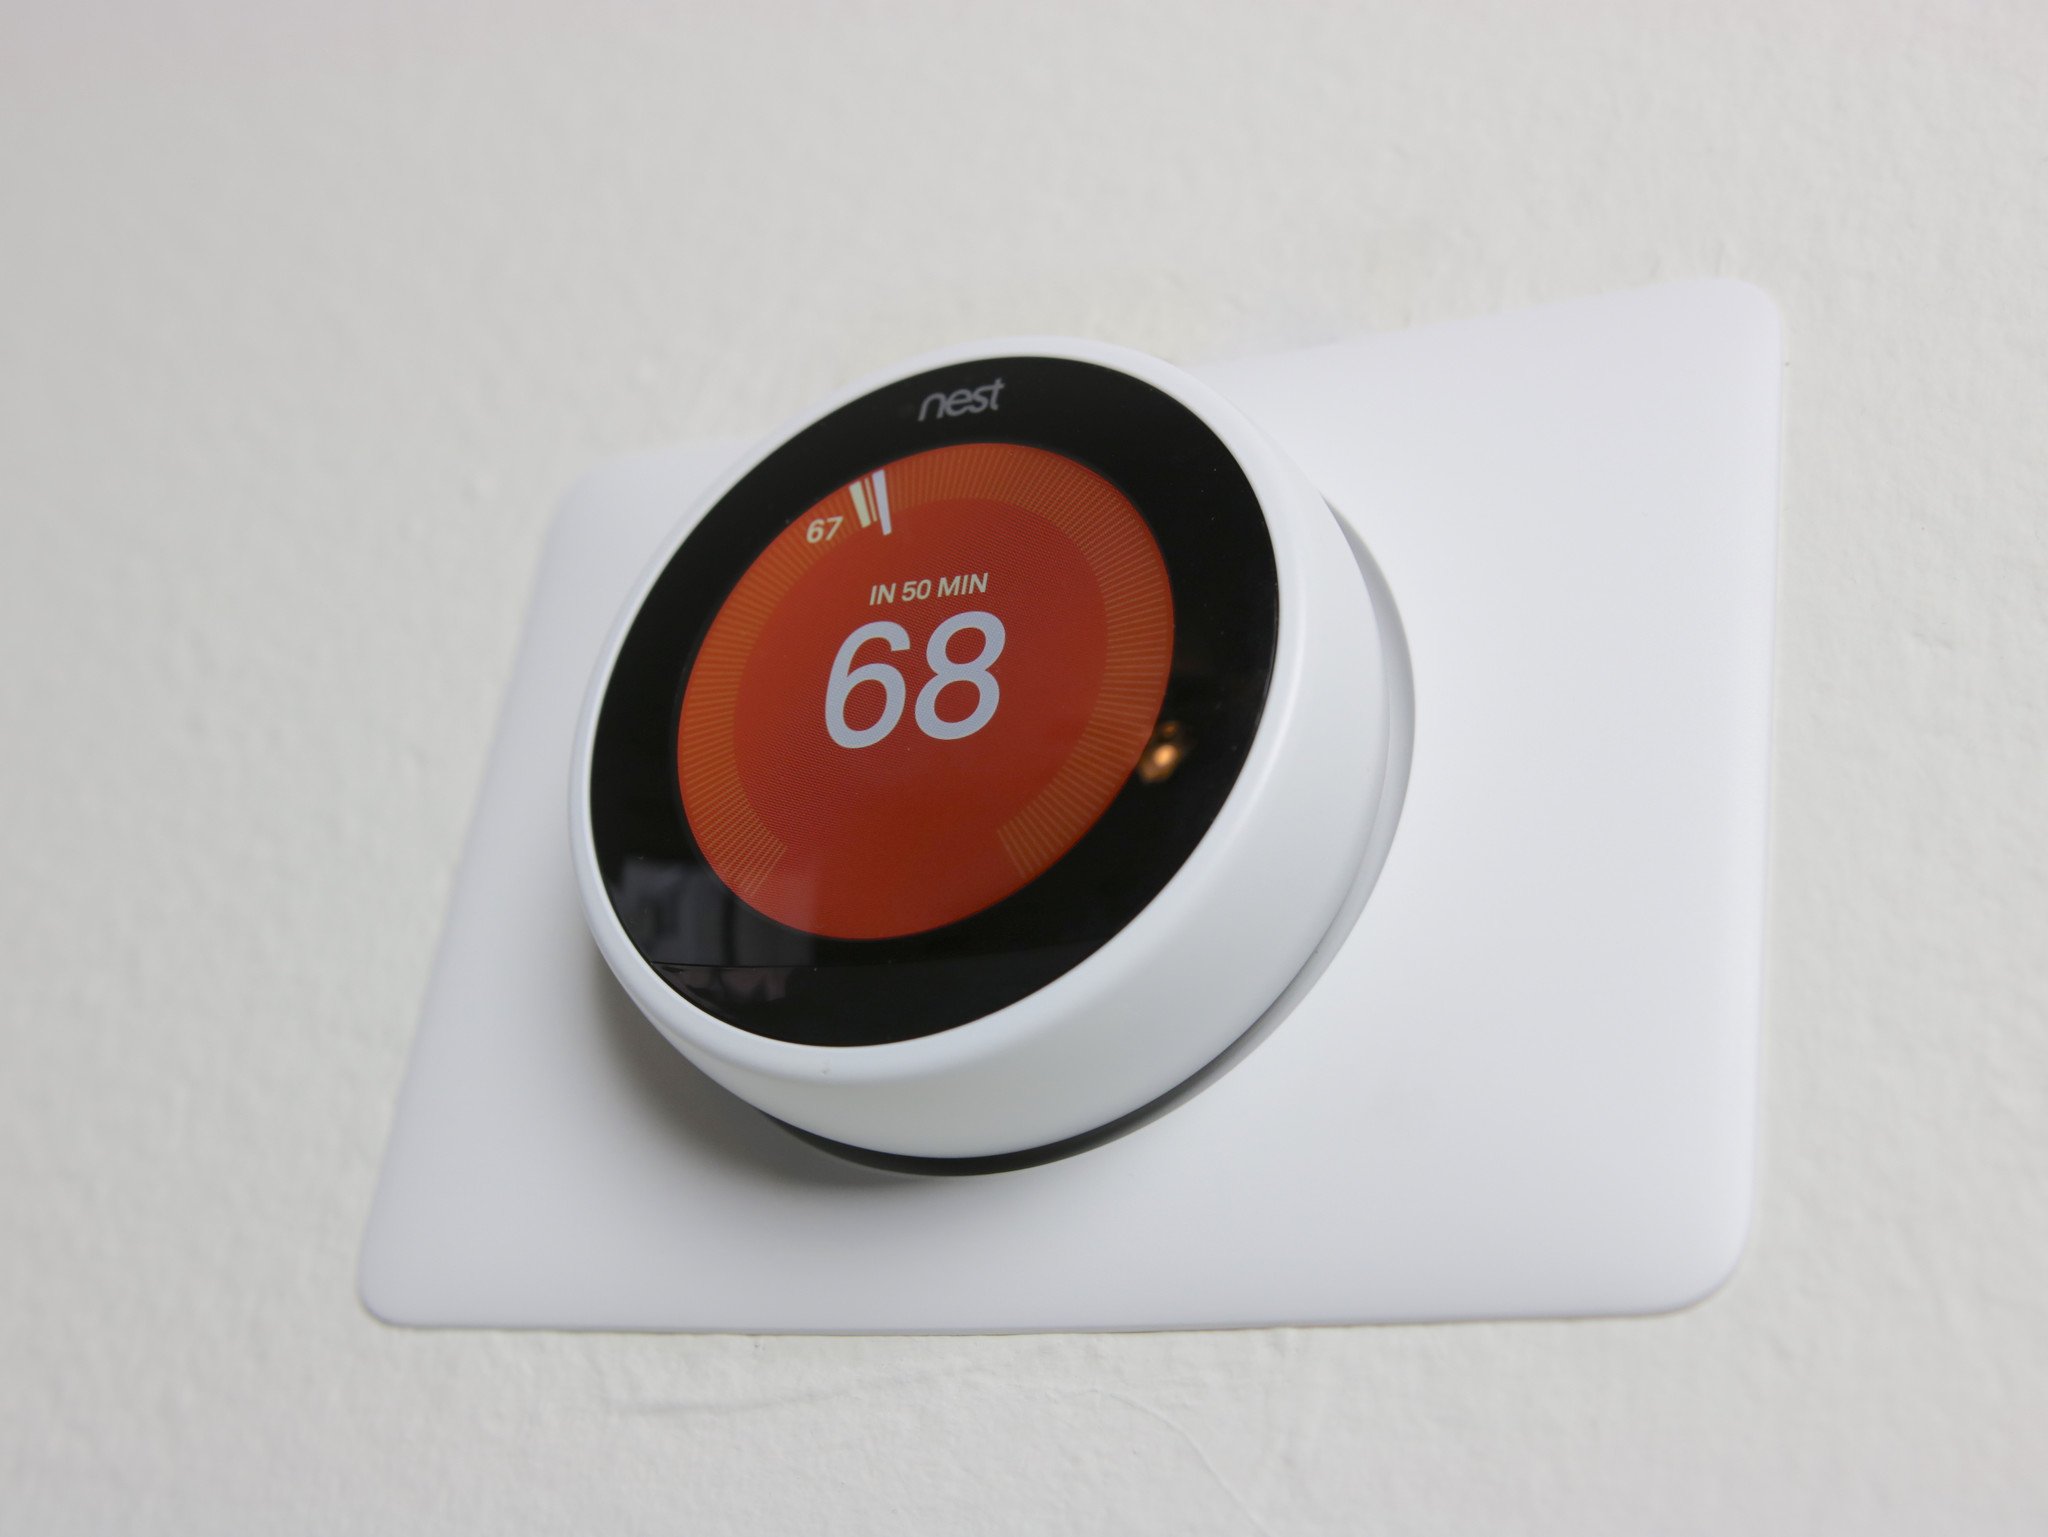 Nest Learning Thermostat 3rd Gen in Heat Mode